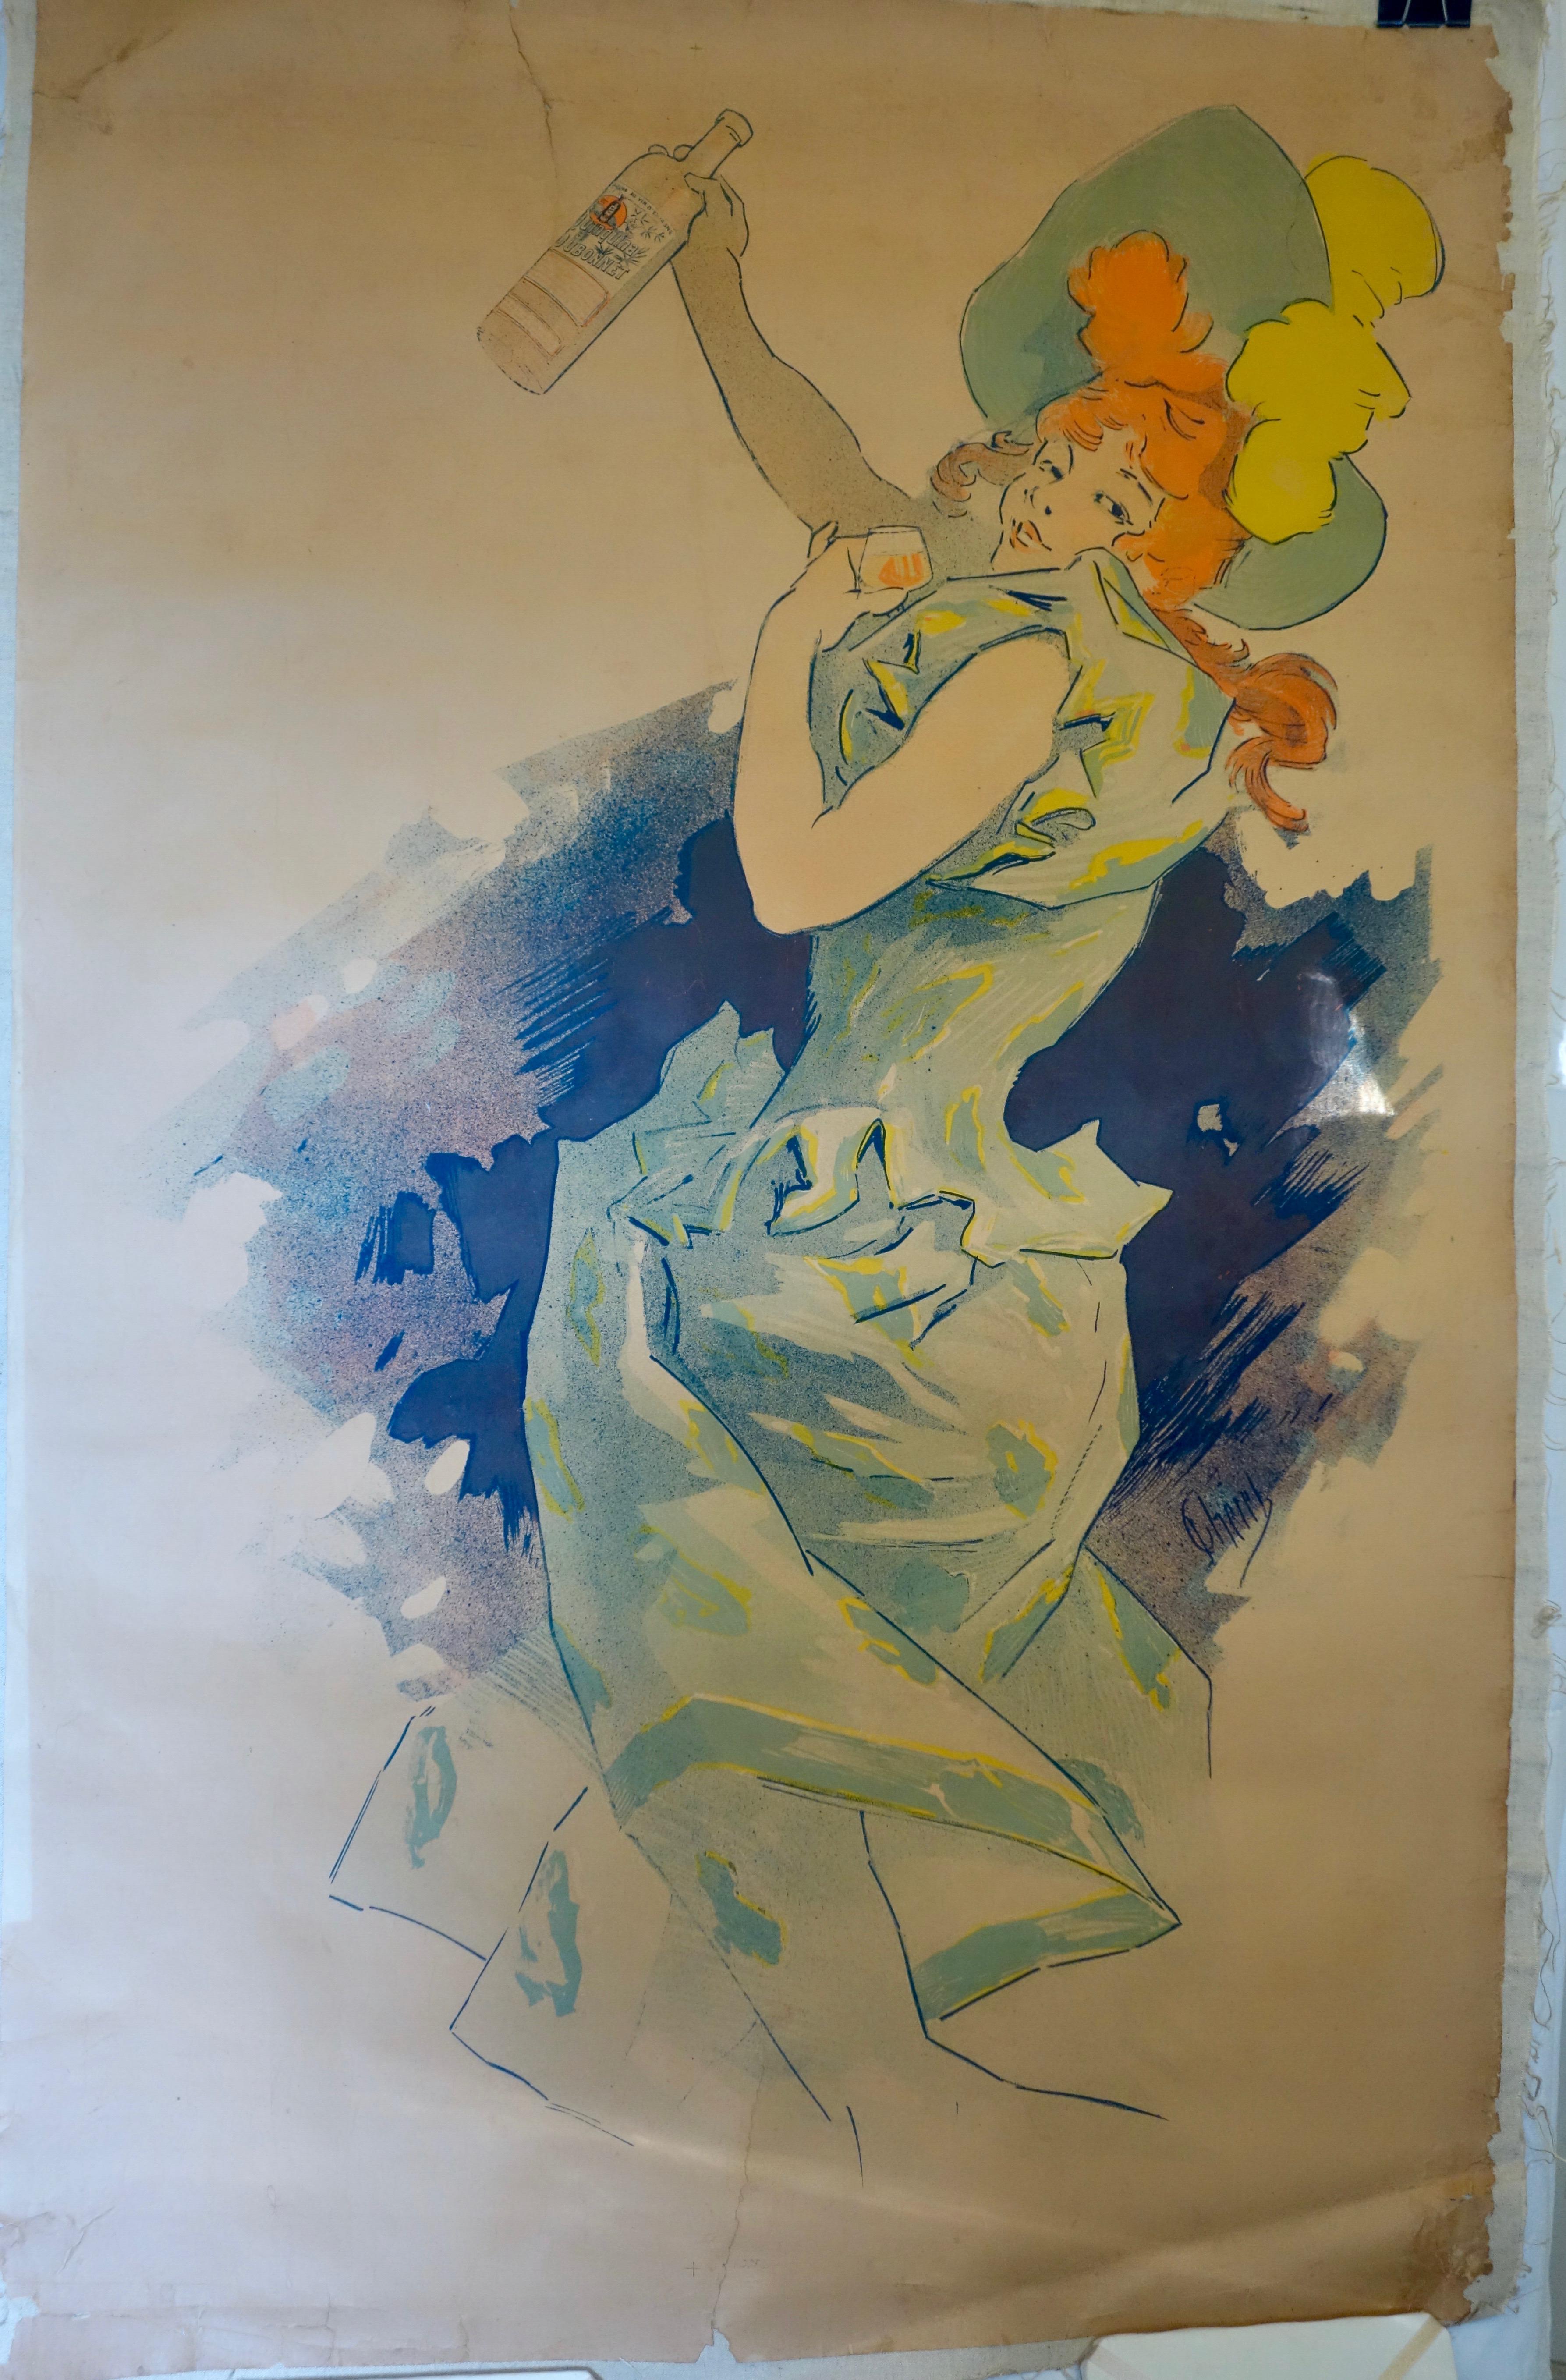 French color lithograph poster on linen for Quinquina Dubonnet by Jules Chéret, 1895.
An original color Belle Époque lithograph, signed in image lower right in the blue part. This is one of the earliest sketch posters made for the company. An